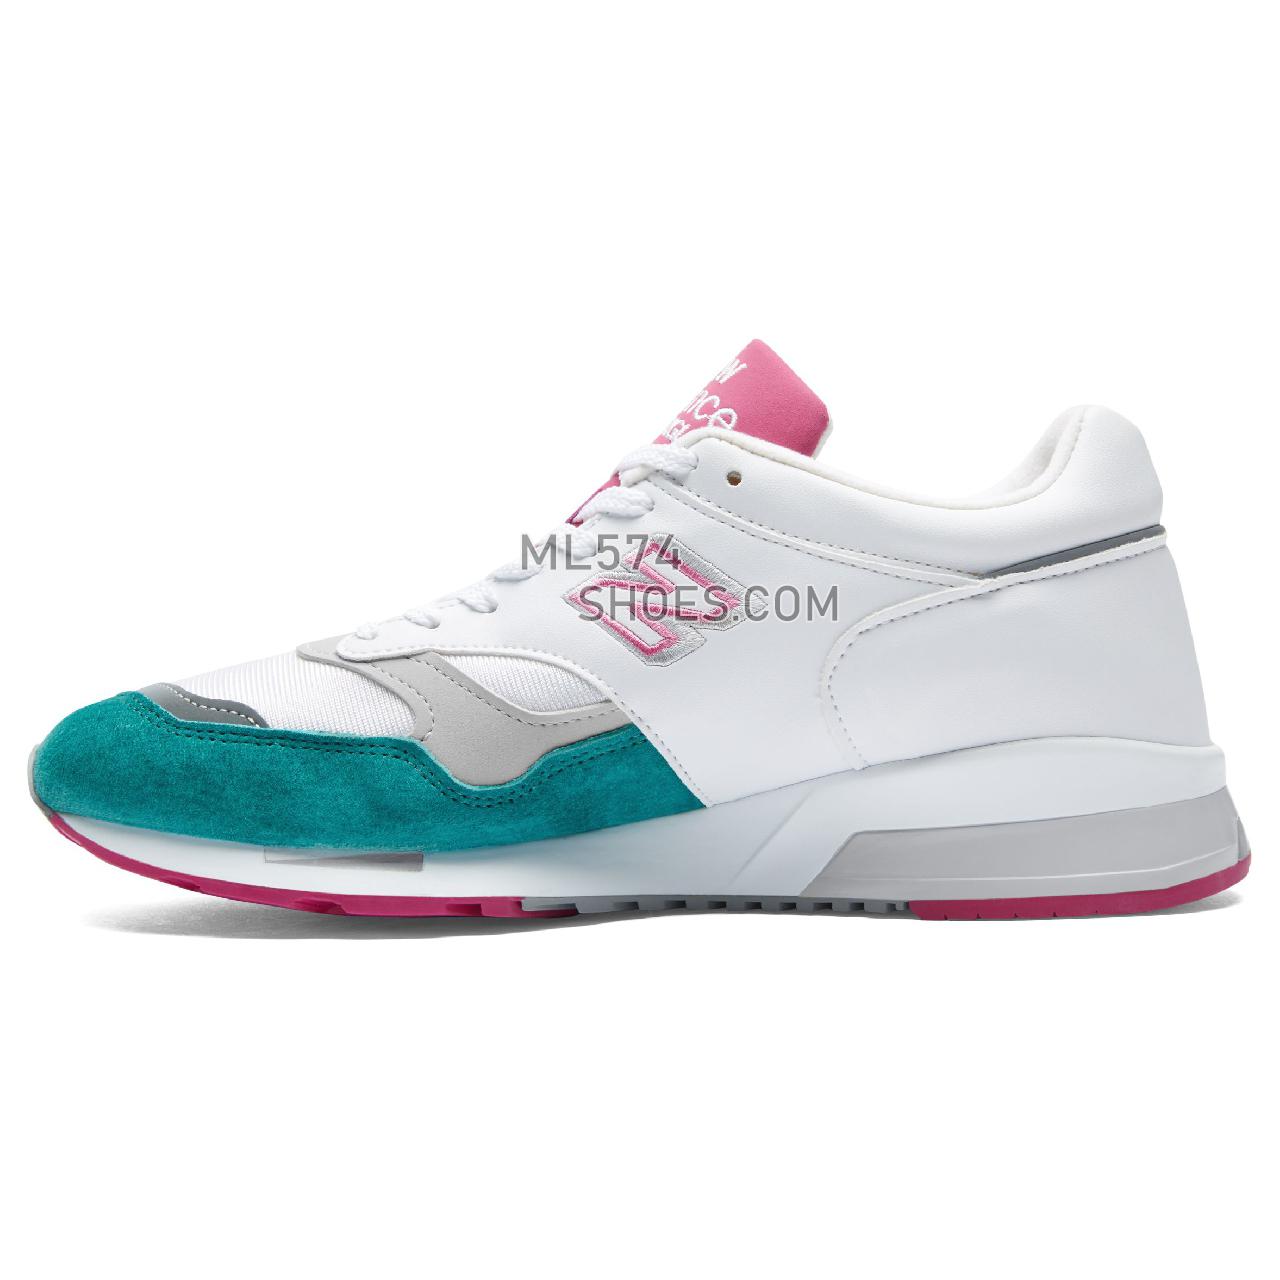 New Balance Made in UK 1500 - Men's 1500 Made in UK Classic M1500-PS - White with Teal and Pink - M1500WTP